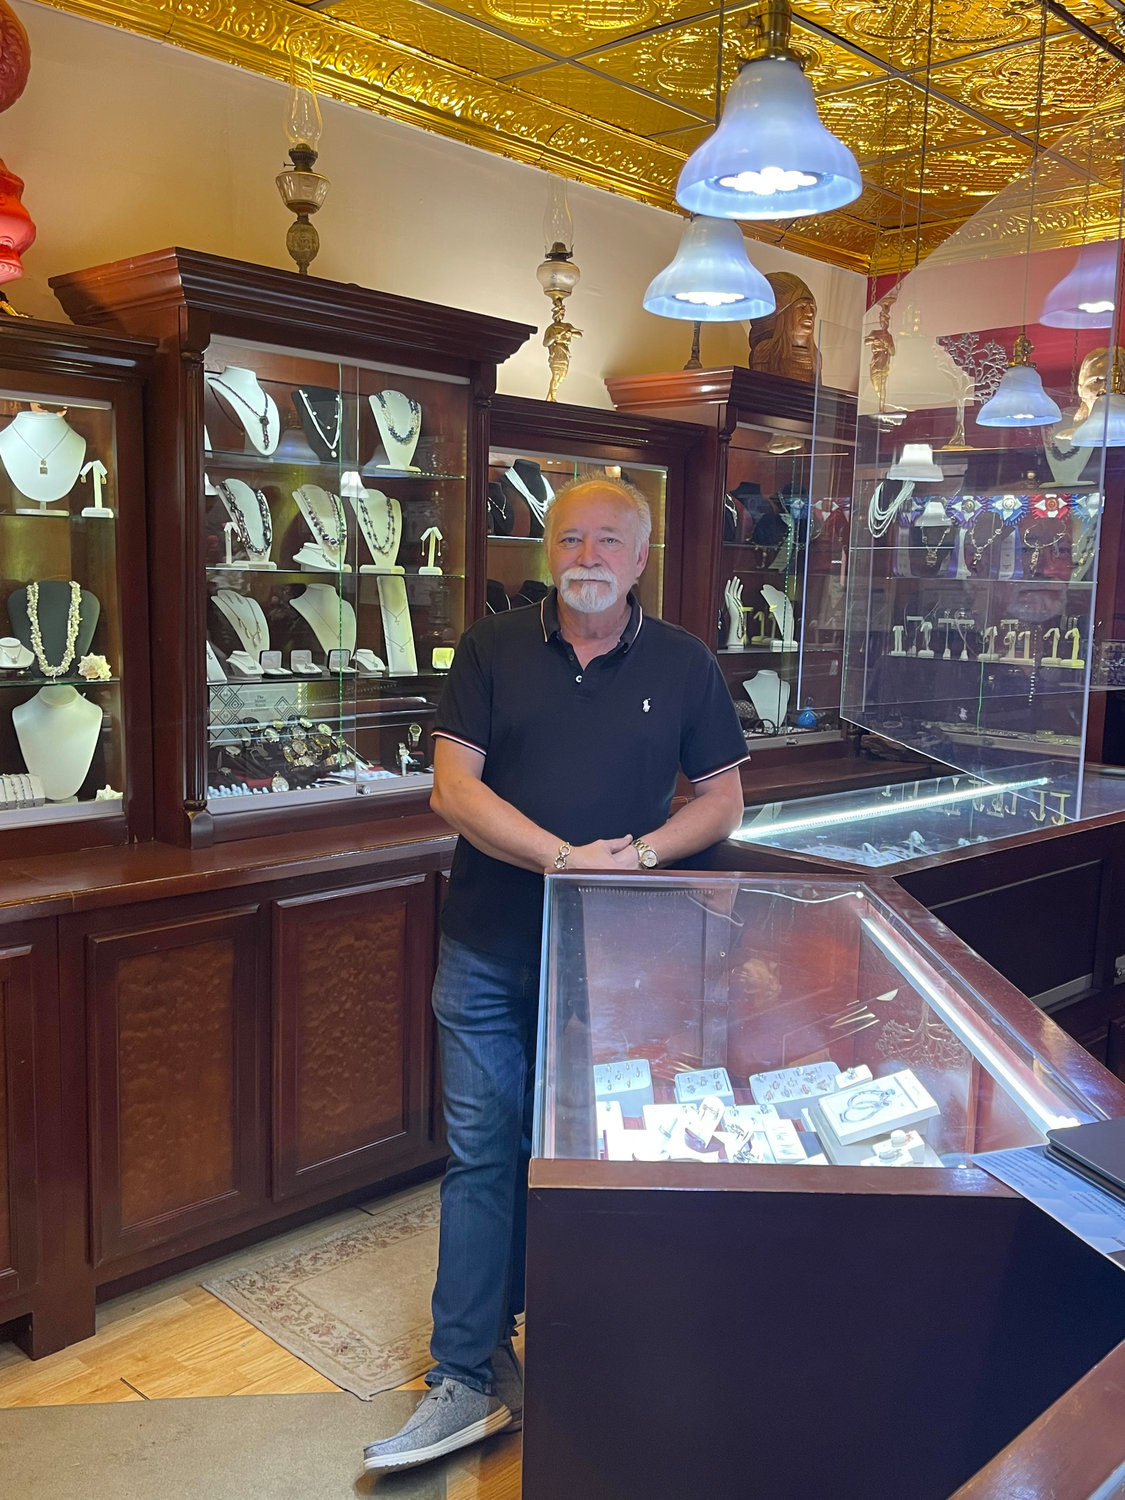 Randy Clair, owner of Clair’s Jewelers holds the title of Master Goldsmith and Award Winning Custom Jewelry Designer. “If someone comes in and buys a ring, I can go in the back and fix it, size it, solder [rings] together-whatever you need I can do it (in house),” explained Clair of his ability and services.